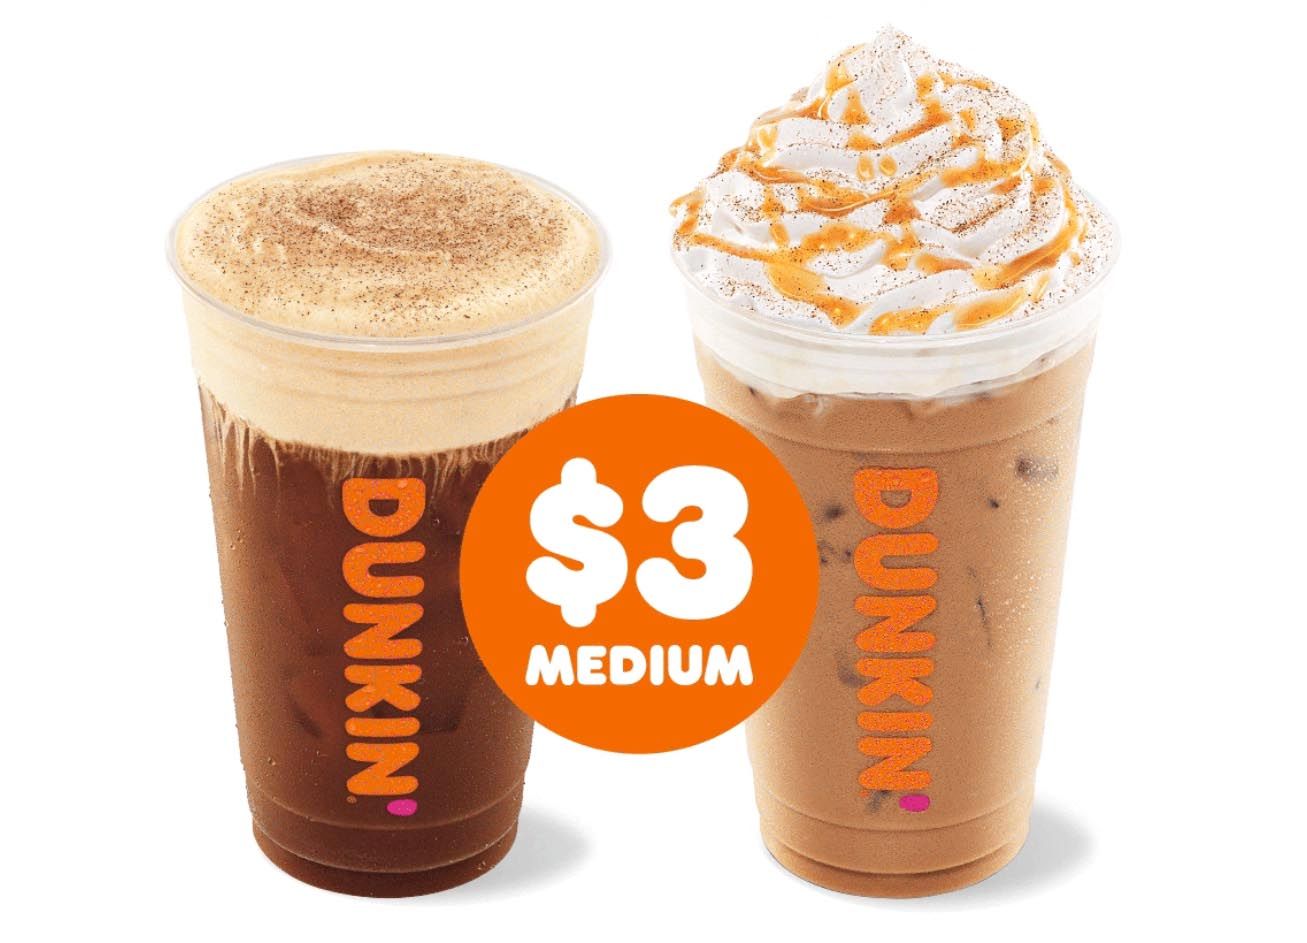 New Pumpkin Cream Cold Brew and Pumpkin Spice Signature Latte Now Available at Dunkin’ Donuts